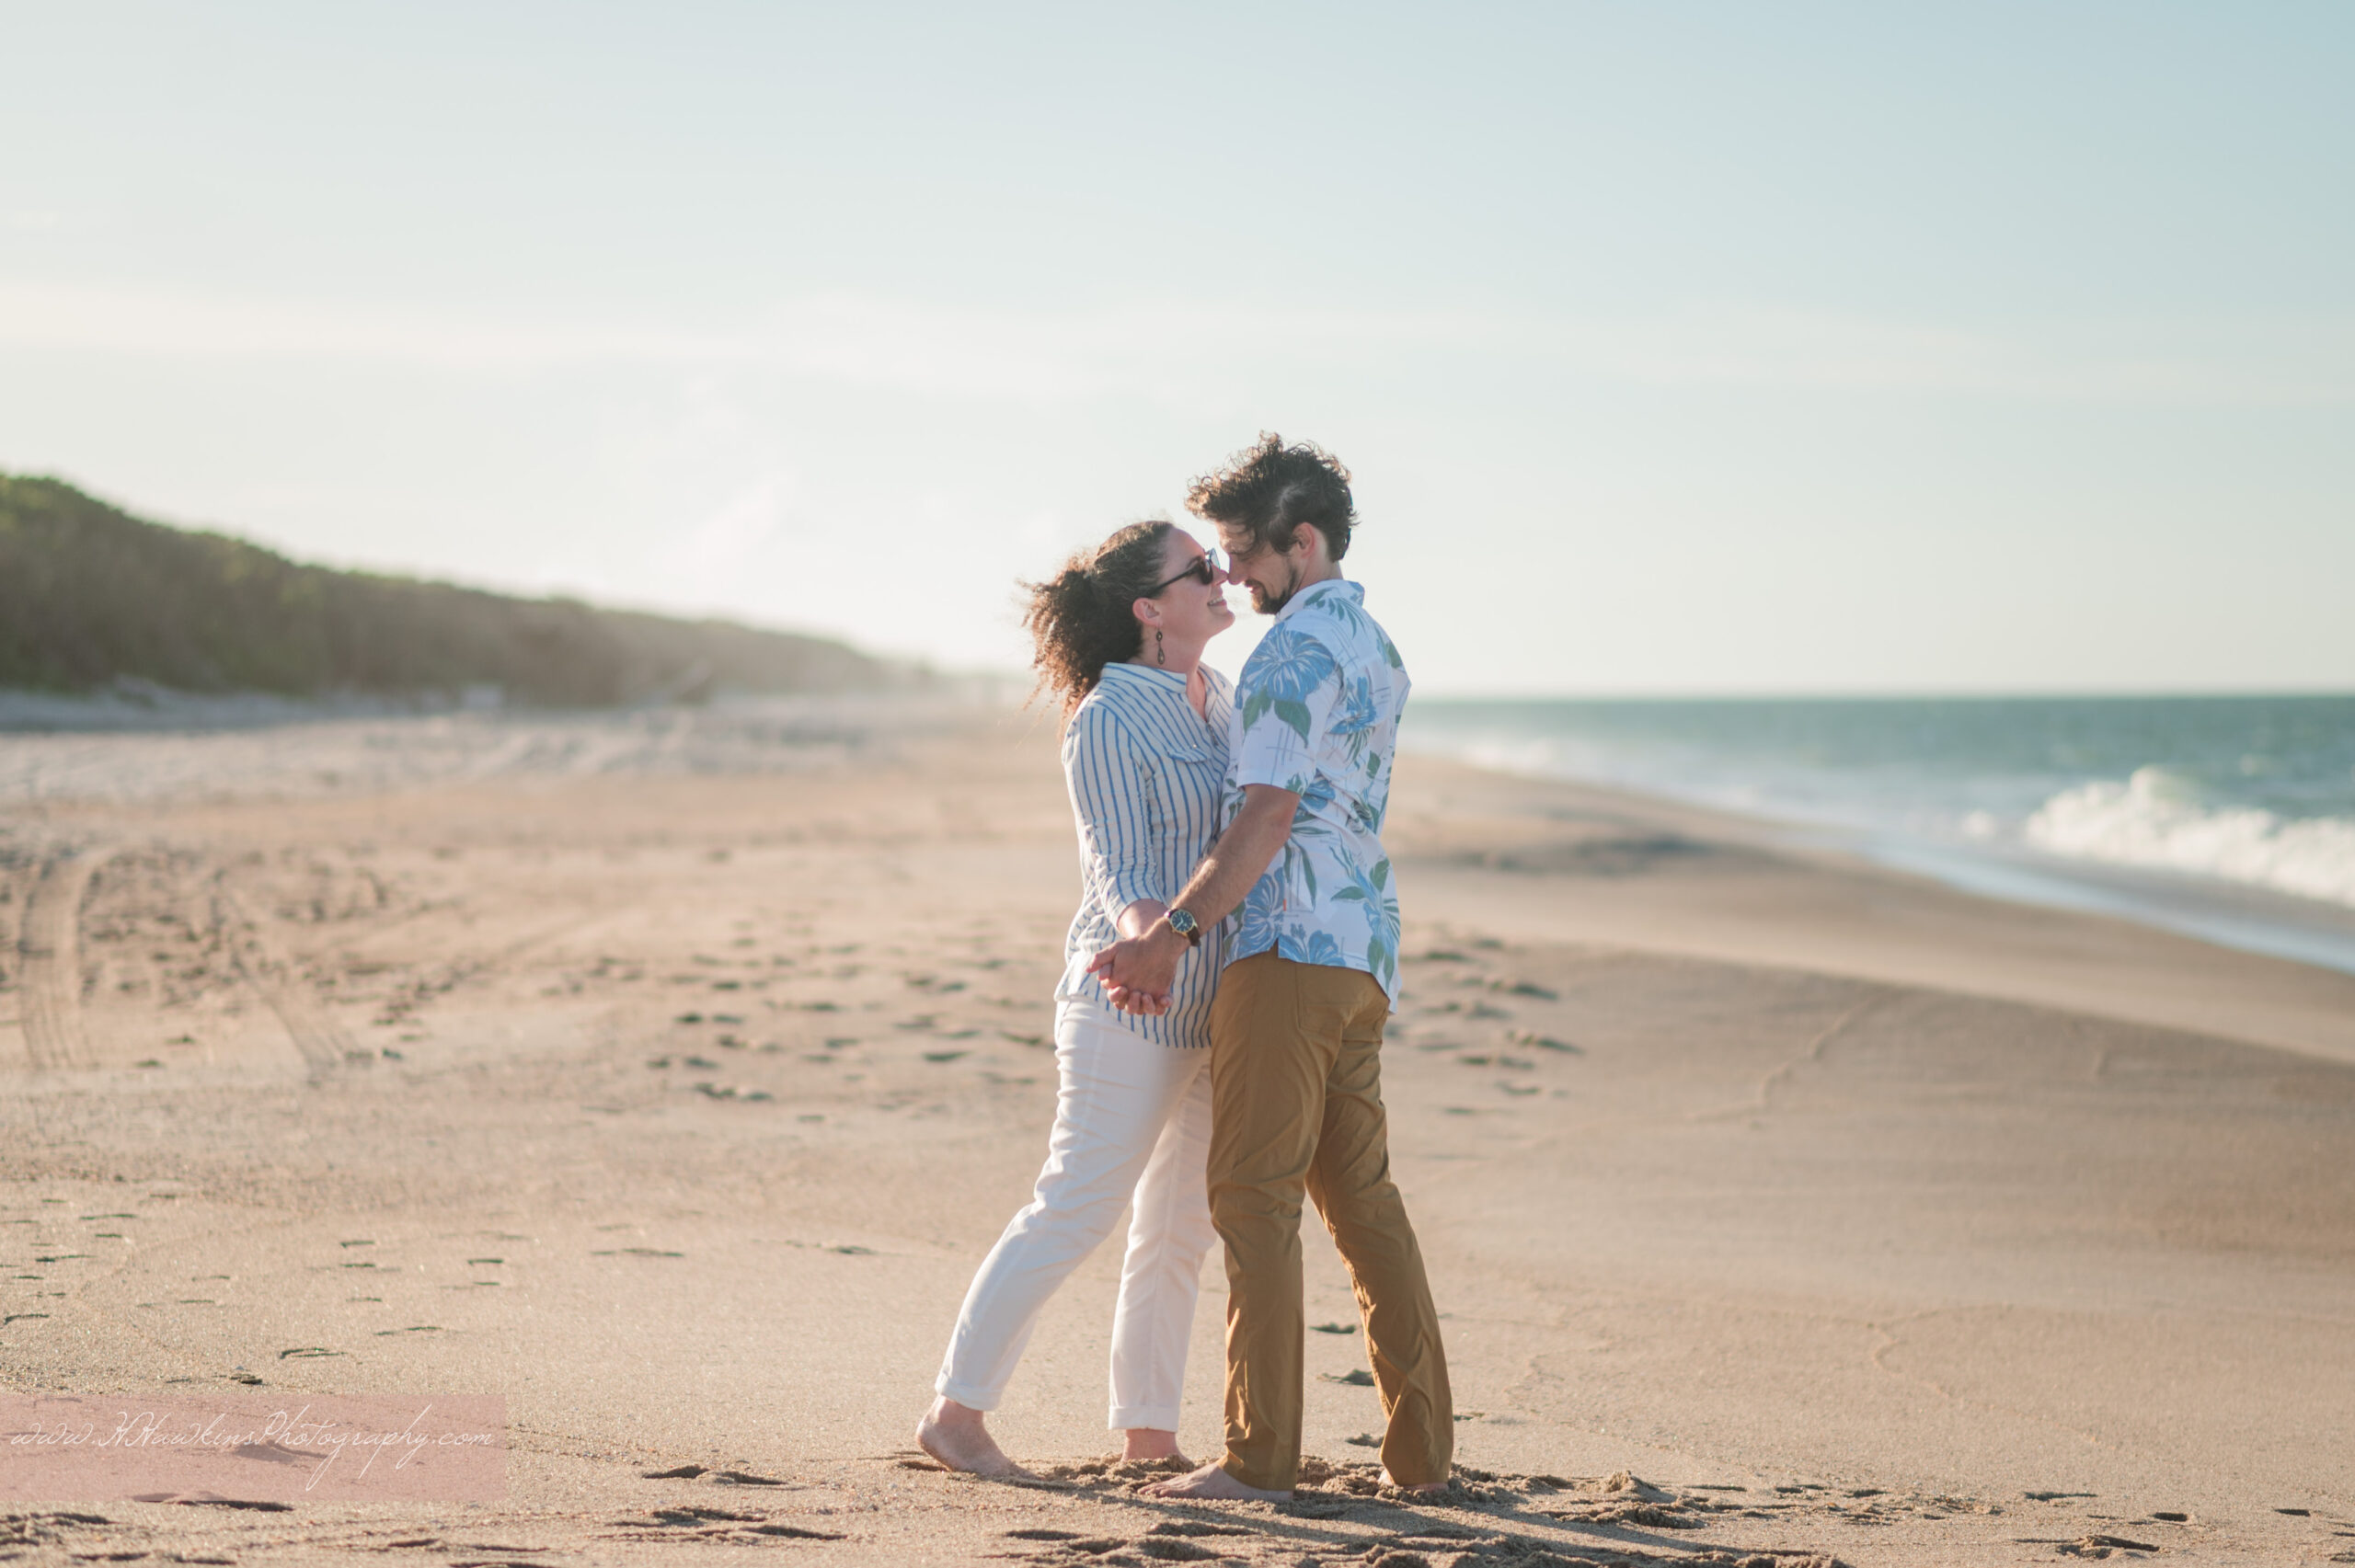 Guy and girl in an almost kiss standing on the sand of Playalinda Beach during their engagement photos session